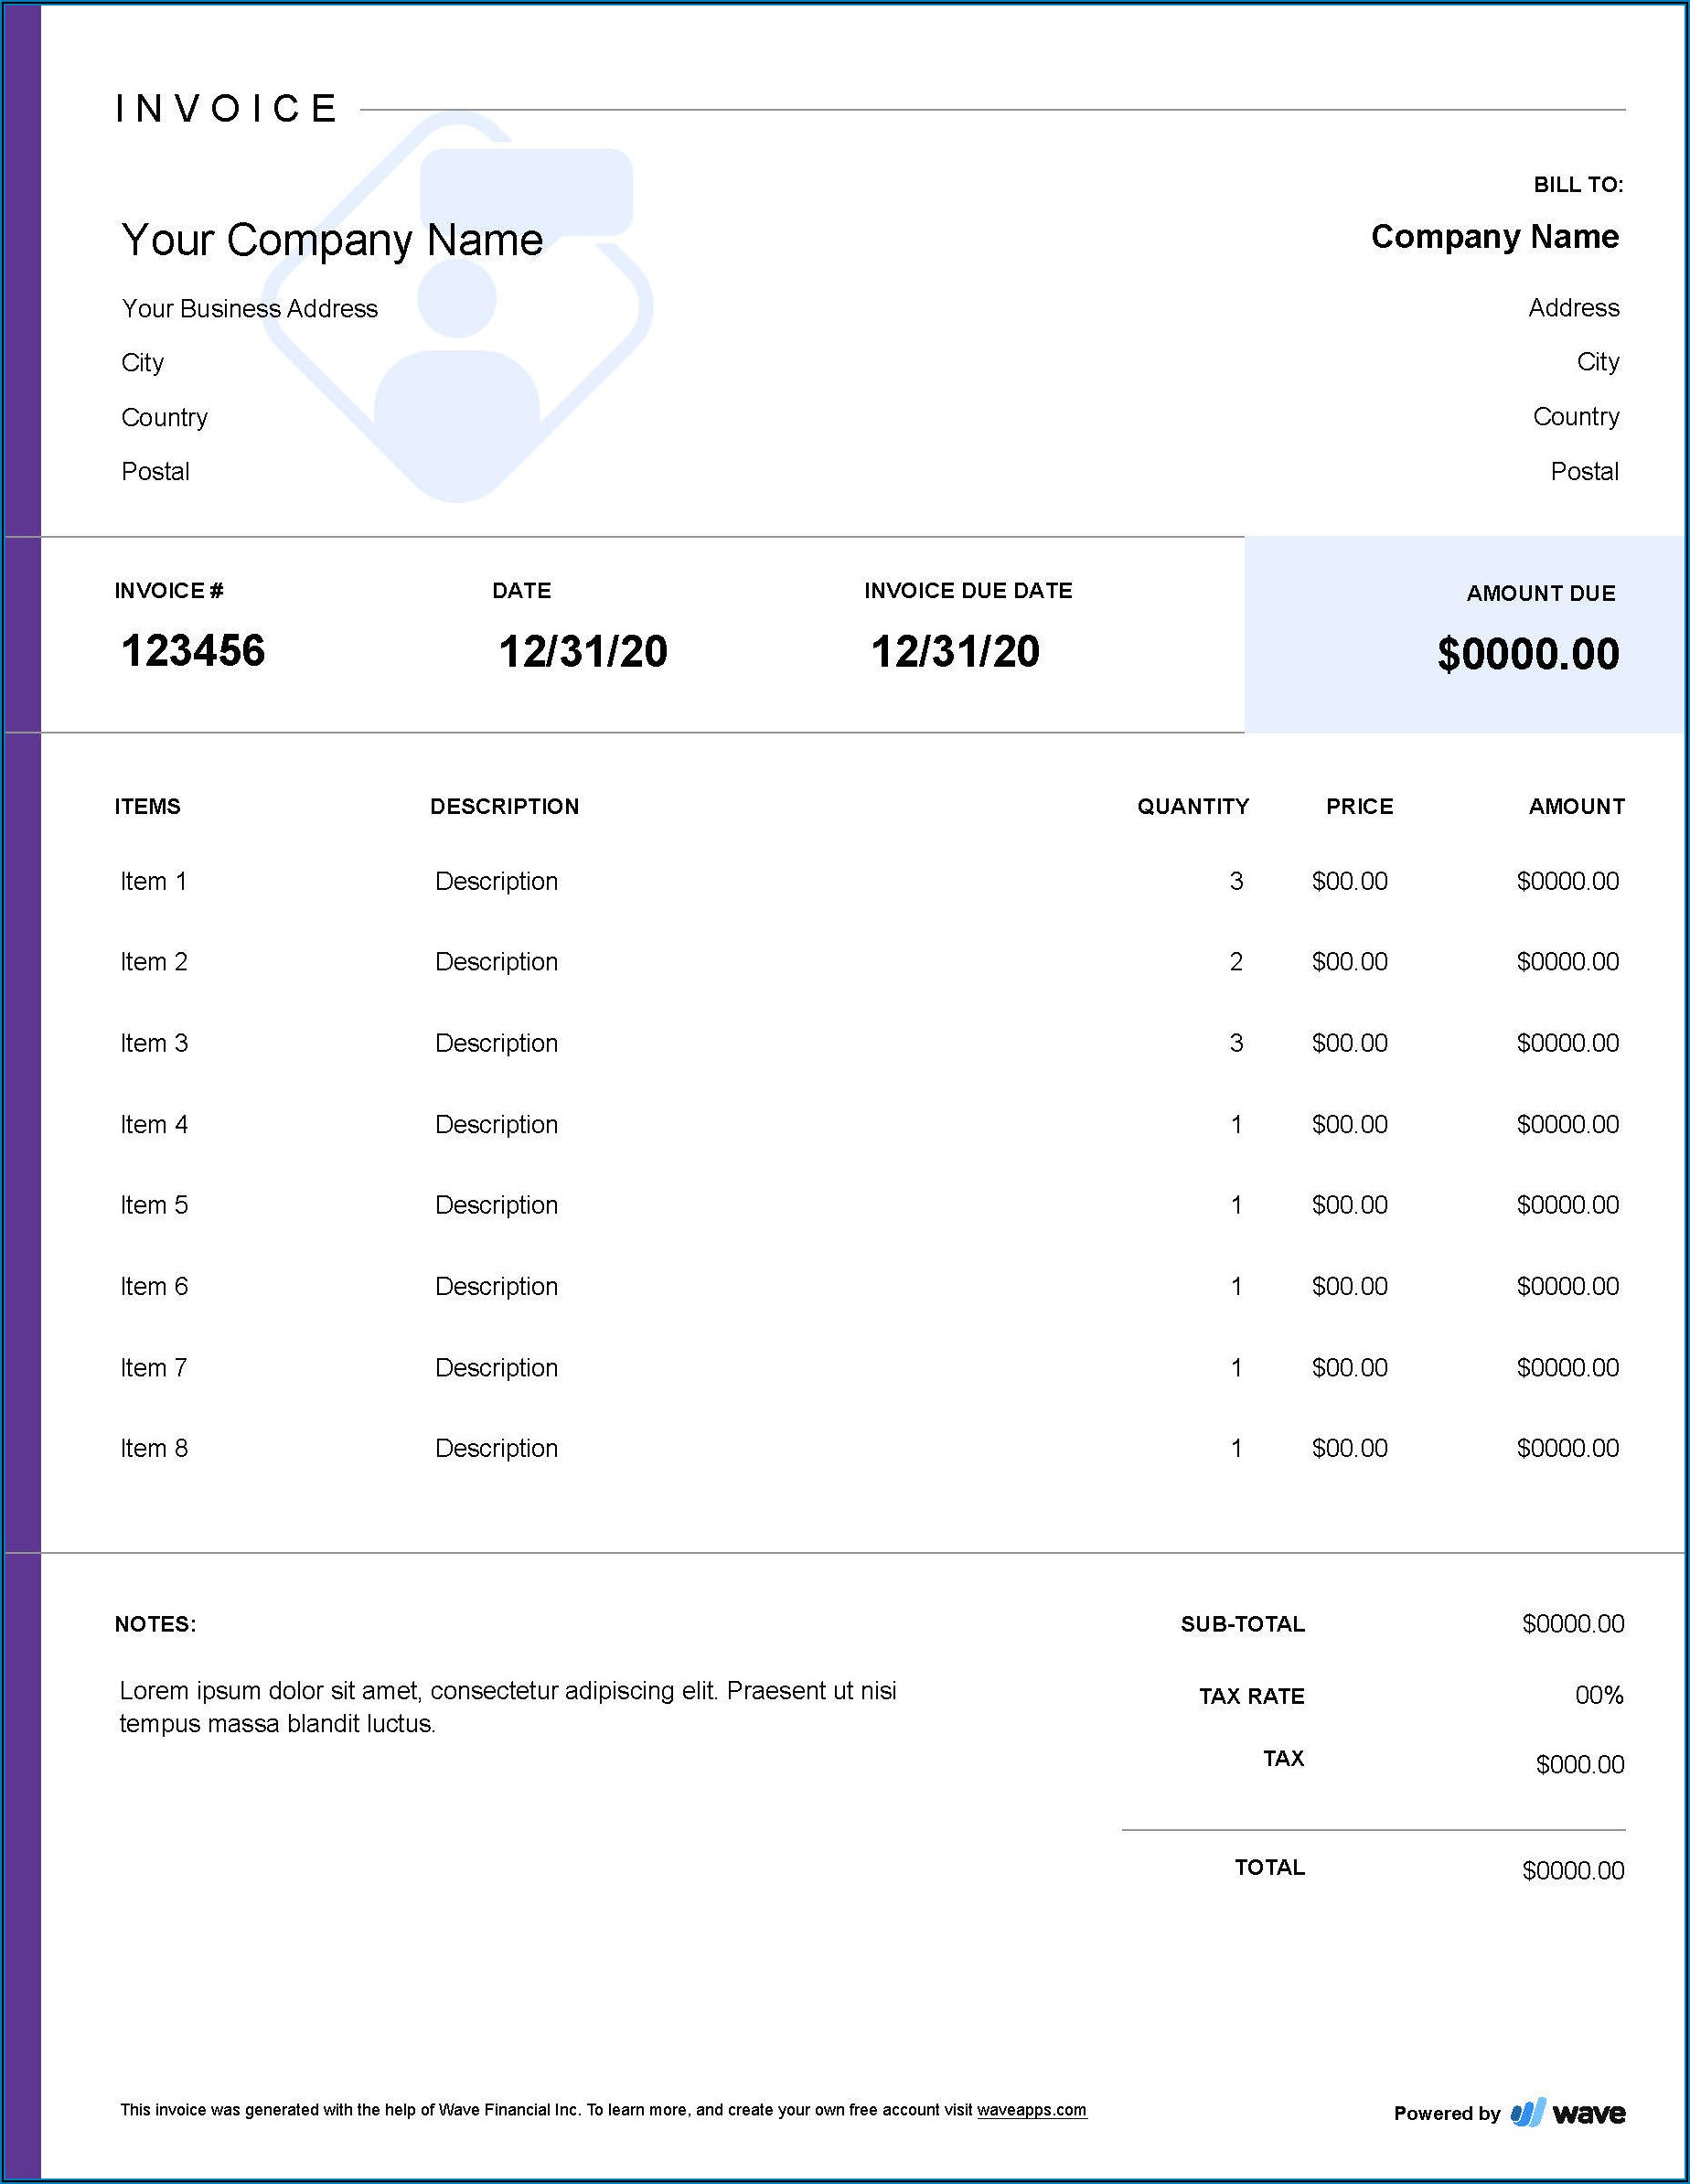 Invoice Samples For Consulting Services